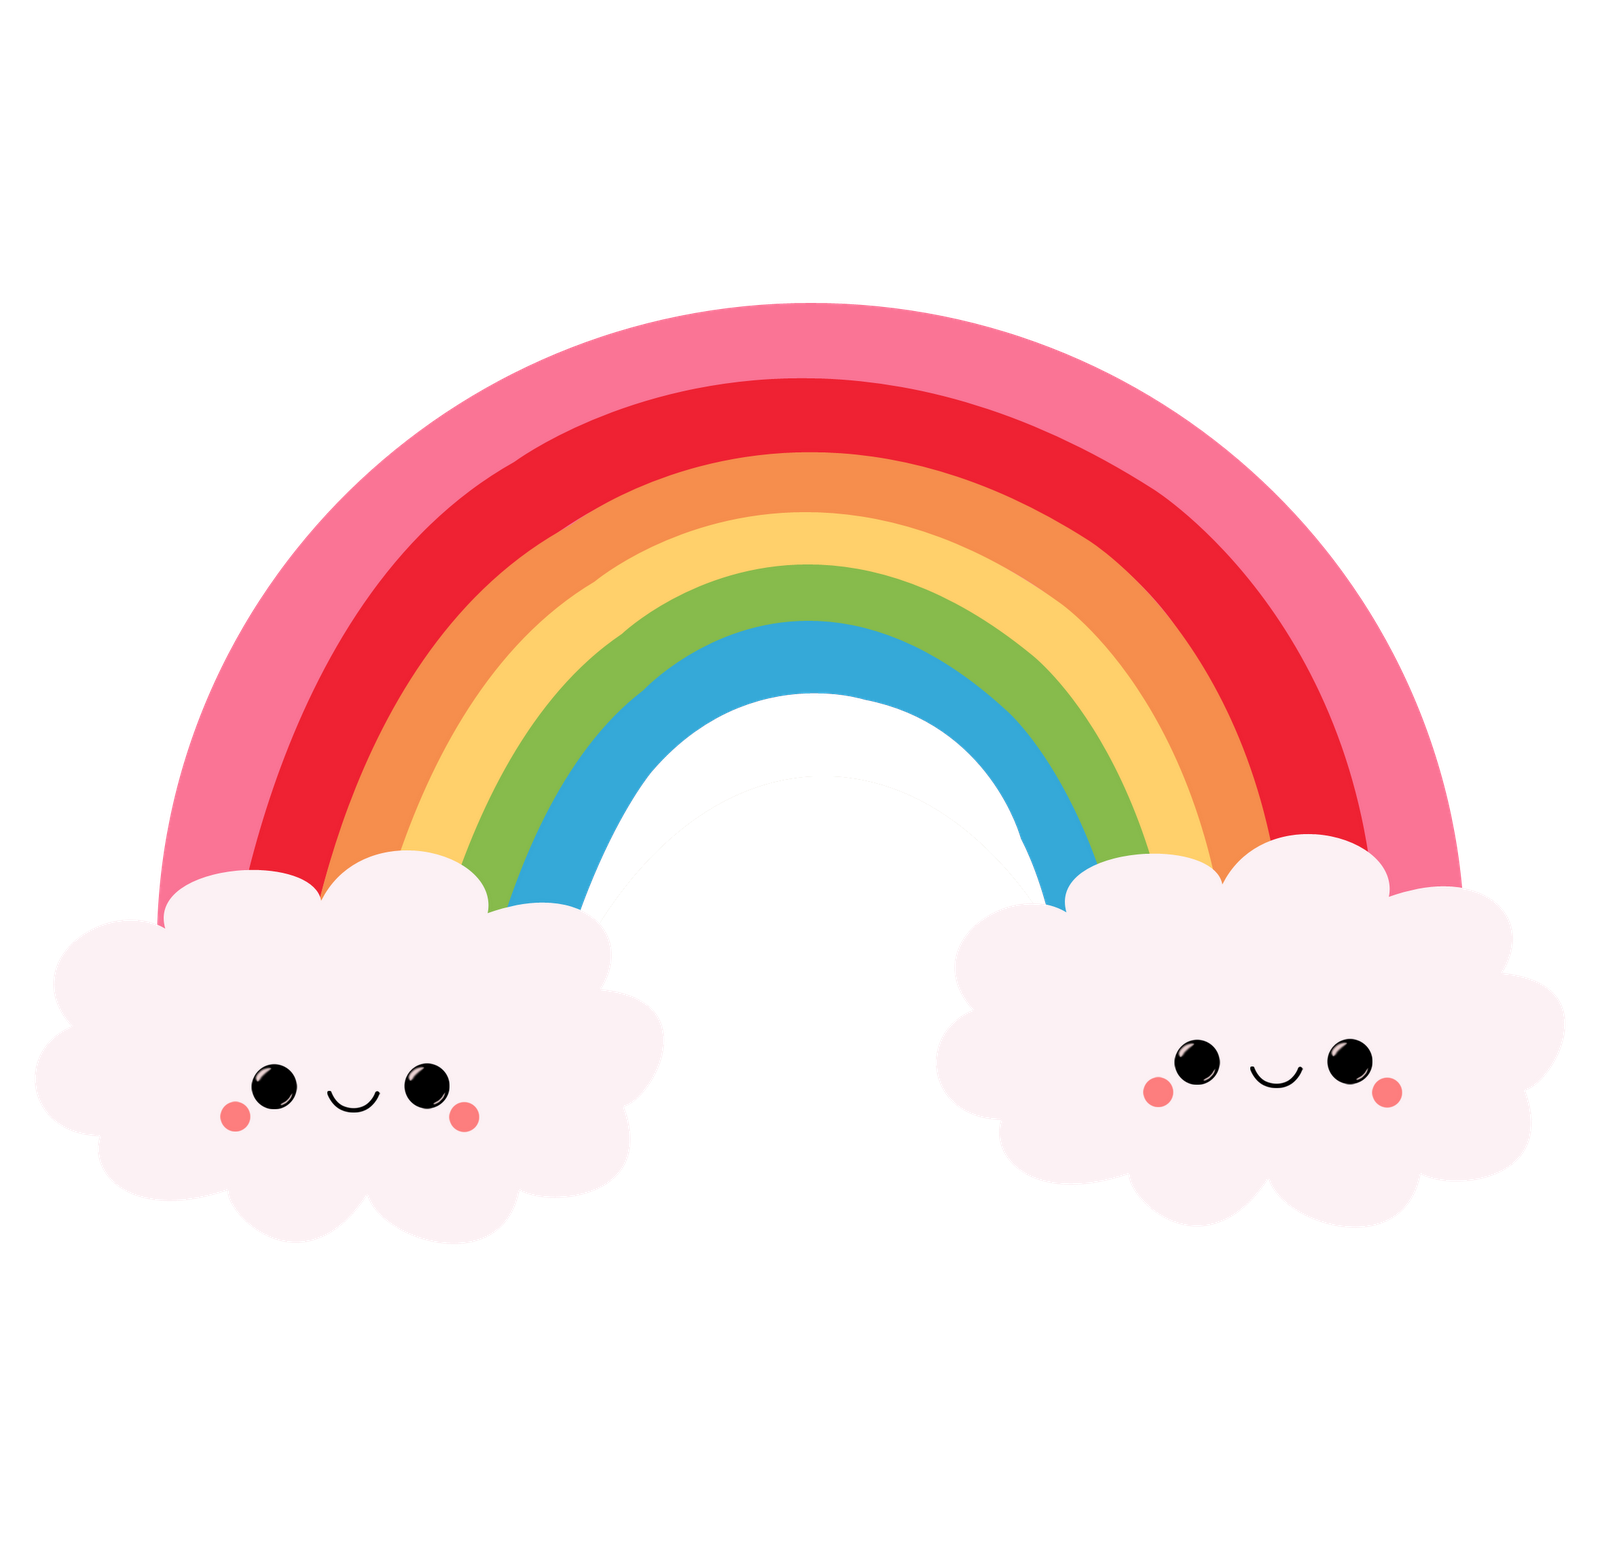 Free Cute Rainbow Png, Download Free Cute Rainbow Png png images, Free